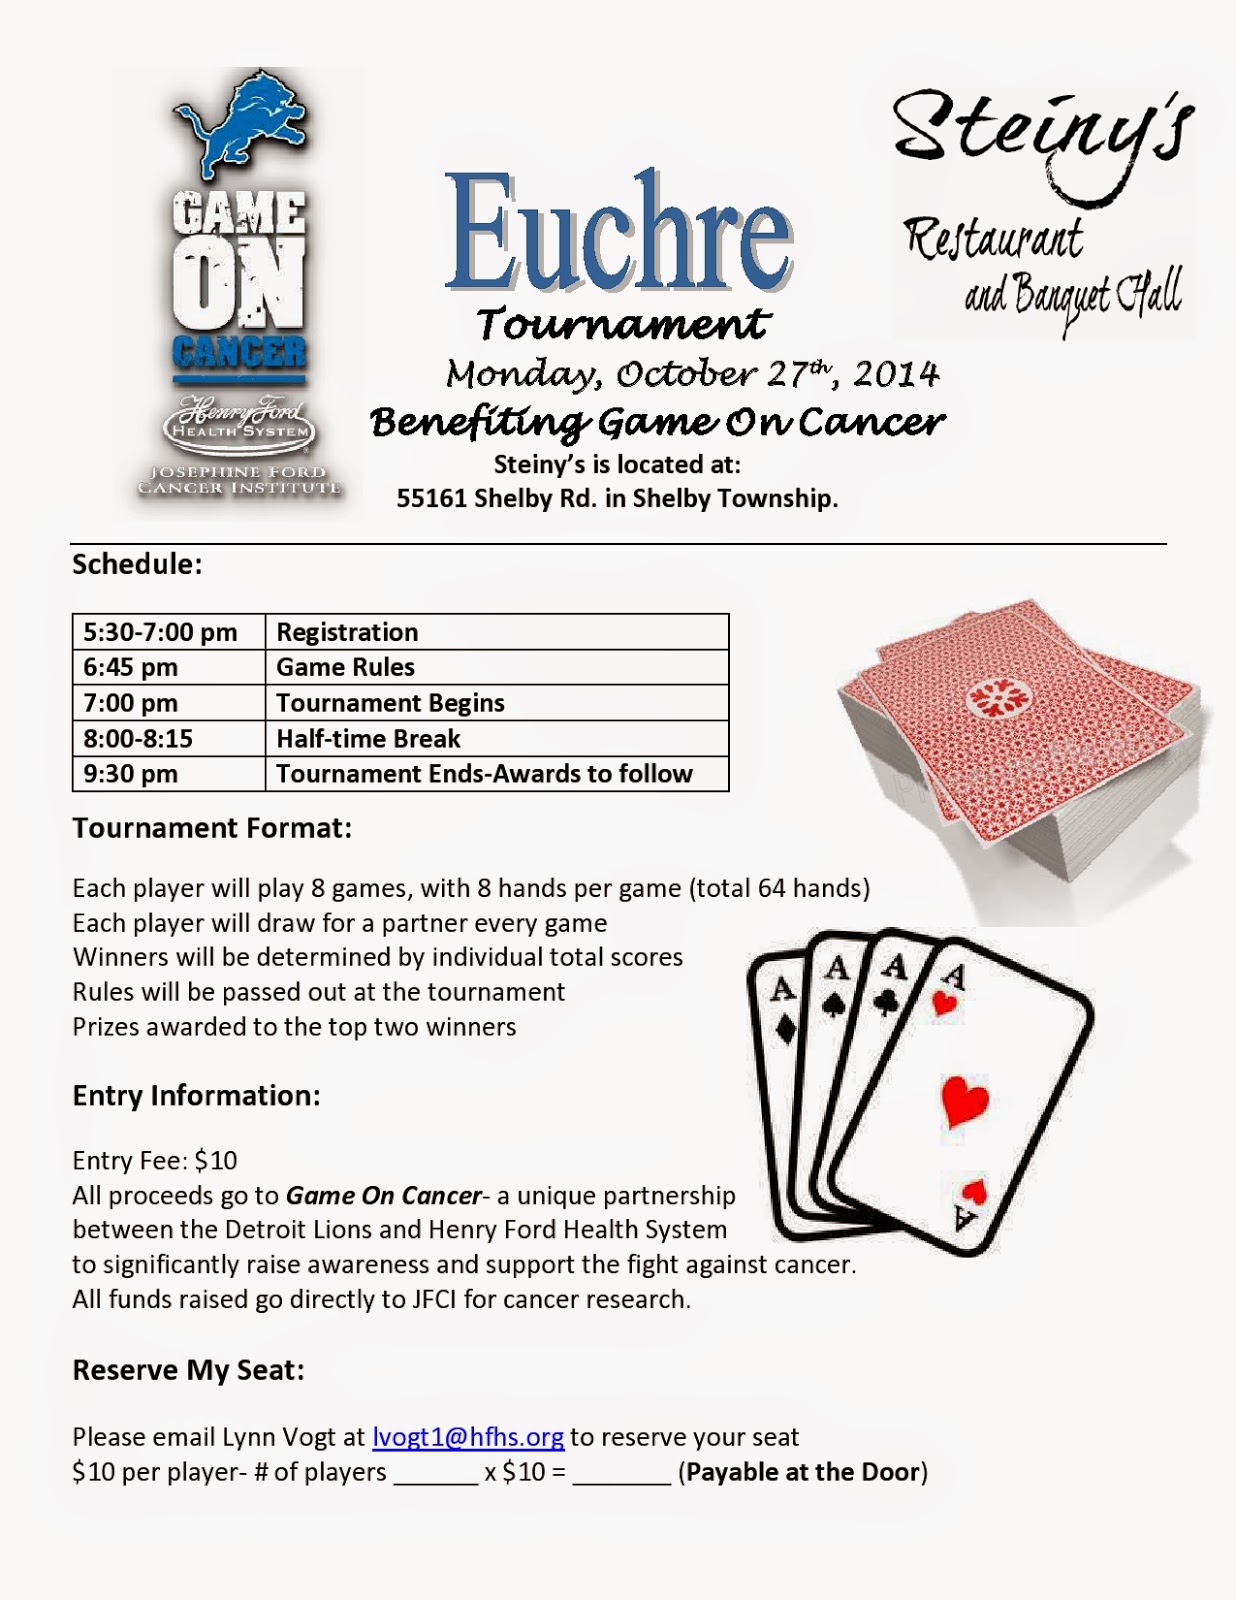 euchre-score-cards-that-are-witty-tristan-website